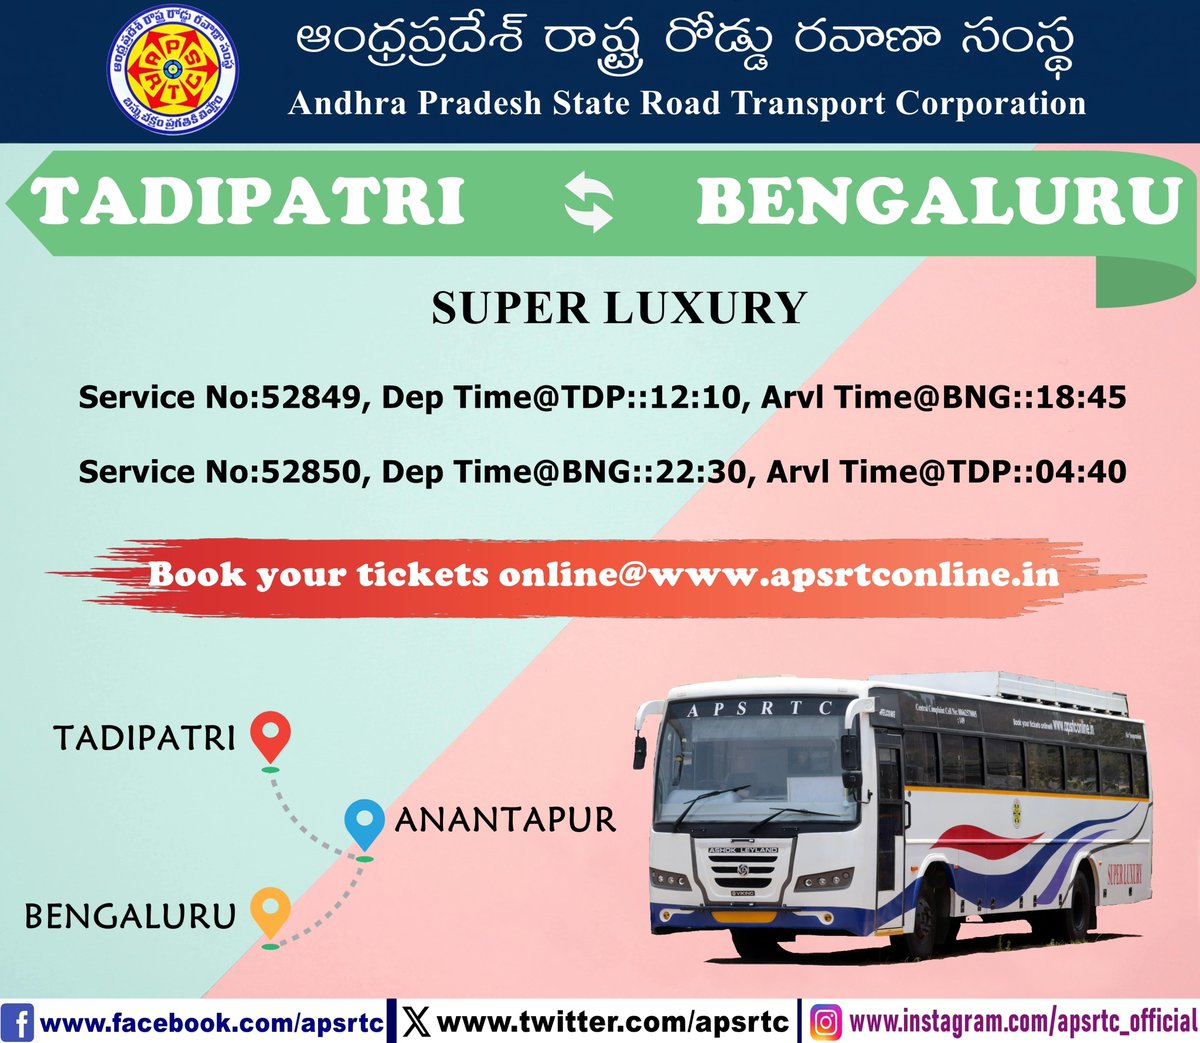 APSRTC is Operating Super Luxury Services for Tadipatri - Bengaluru For Bookings Please Visit apsrtconline.in